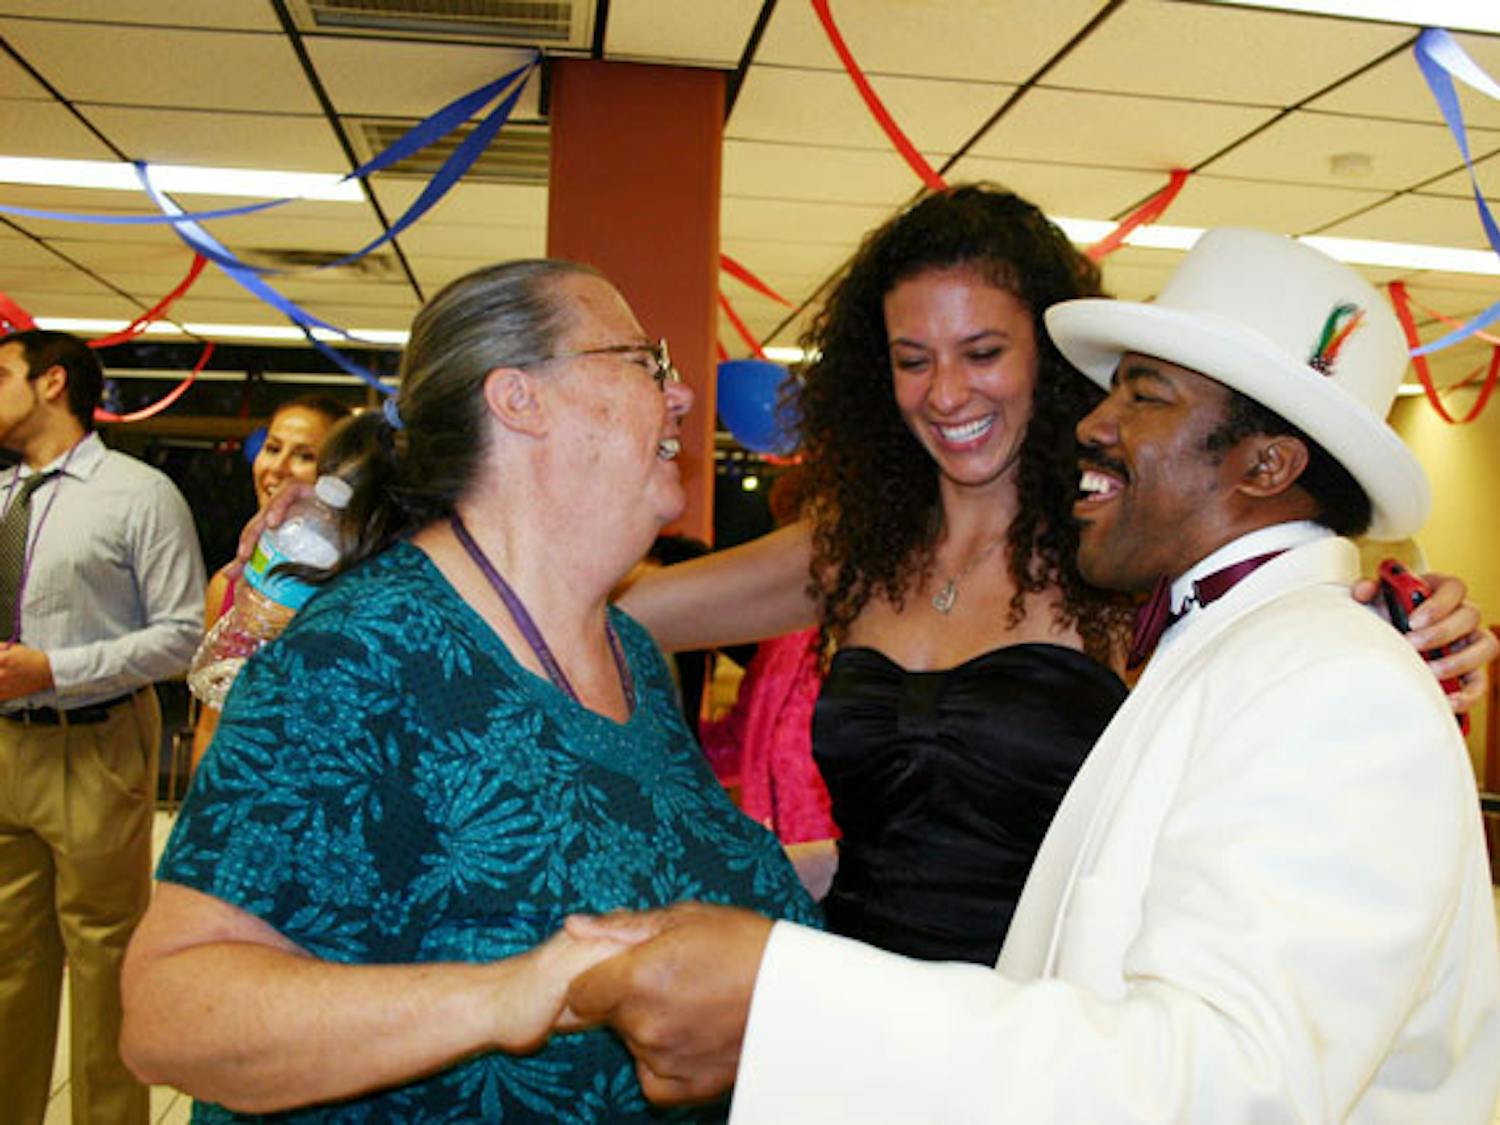 Hazel Porter, 62, and Jason Davis, 39, dance to "Build Me Up Buttercup" with 19-year-old digital media sophomore Miriam Miyara Tuesday night at Oak Park's senior prom, which was hosted by Gamma Eta Sorority Inc. and Pi Lambda Phi fraternity.